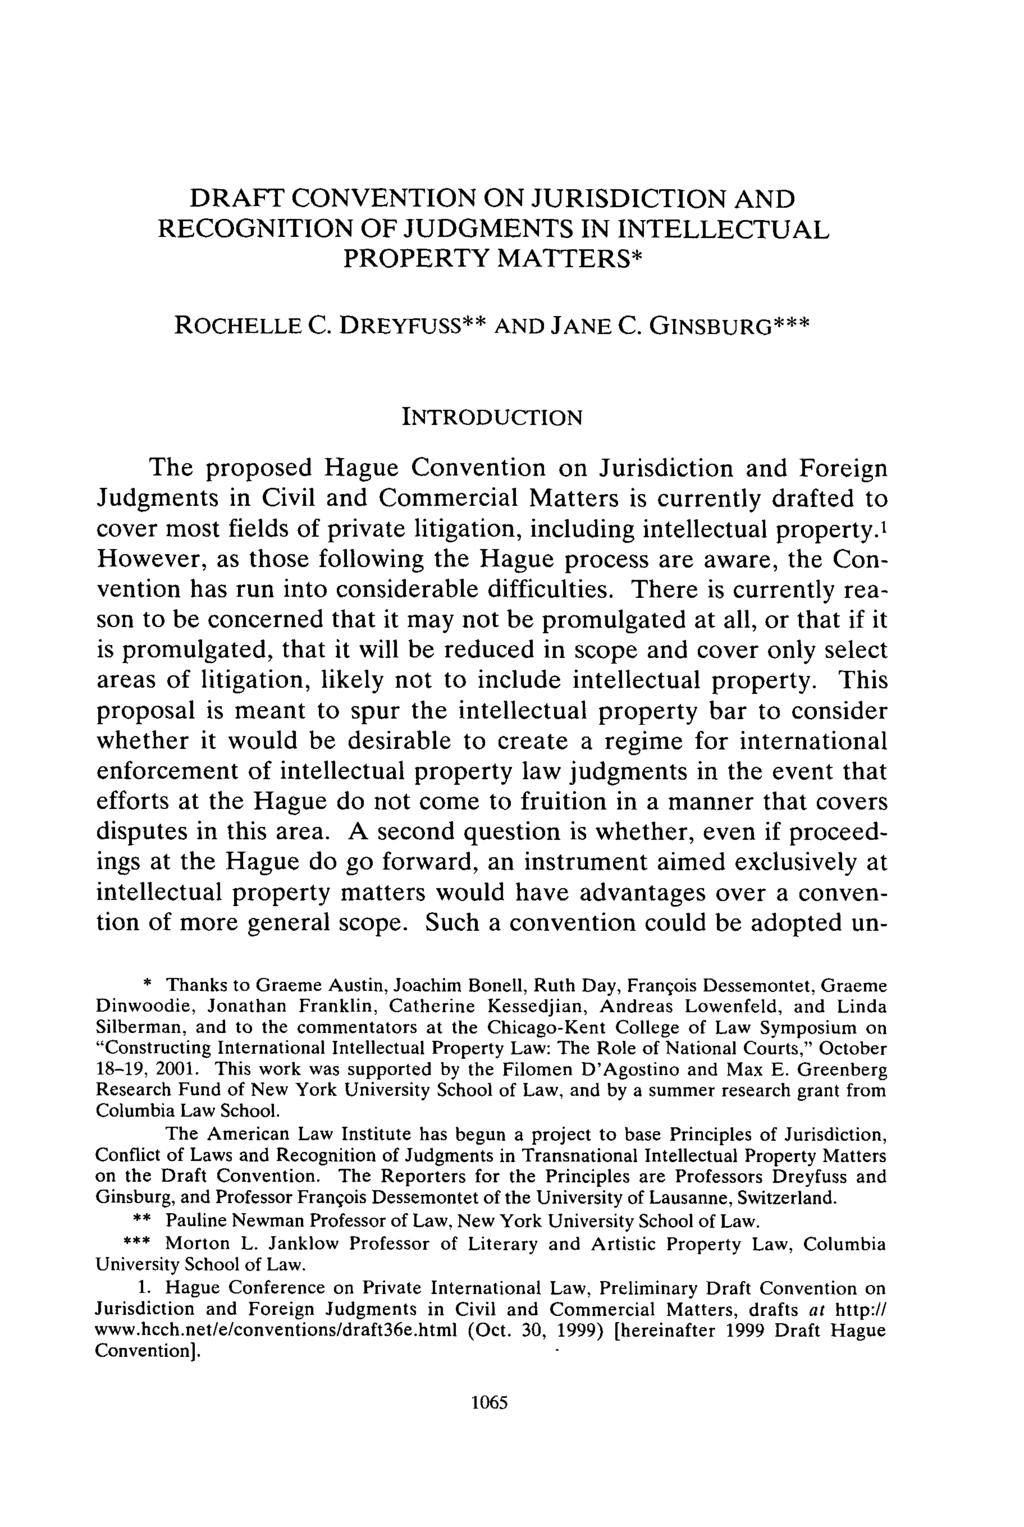 DRAFT CONVENTION ON JURISDICTION AND RECOGNITION OF JUDGMENTS IN INTELLECTUAL PROPERTY MATTERS* ROCHELLE C. DREYFUSS** AND JANE C.